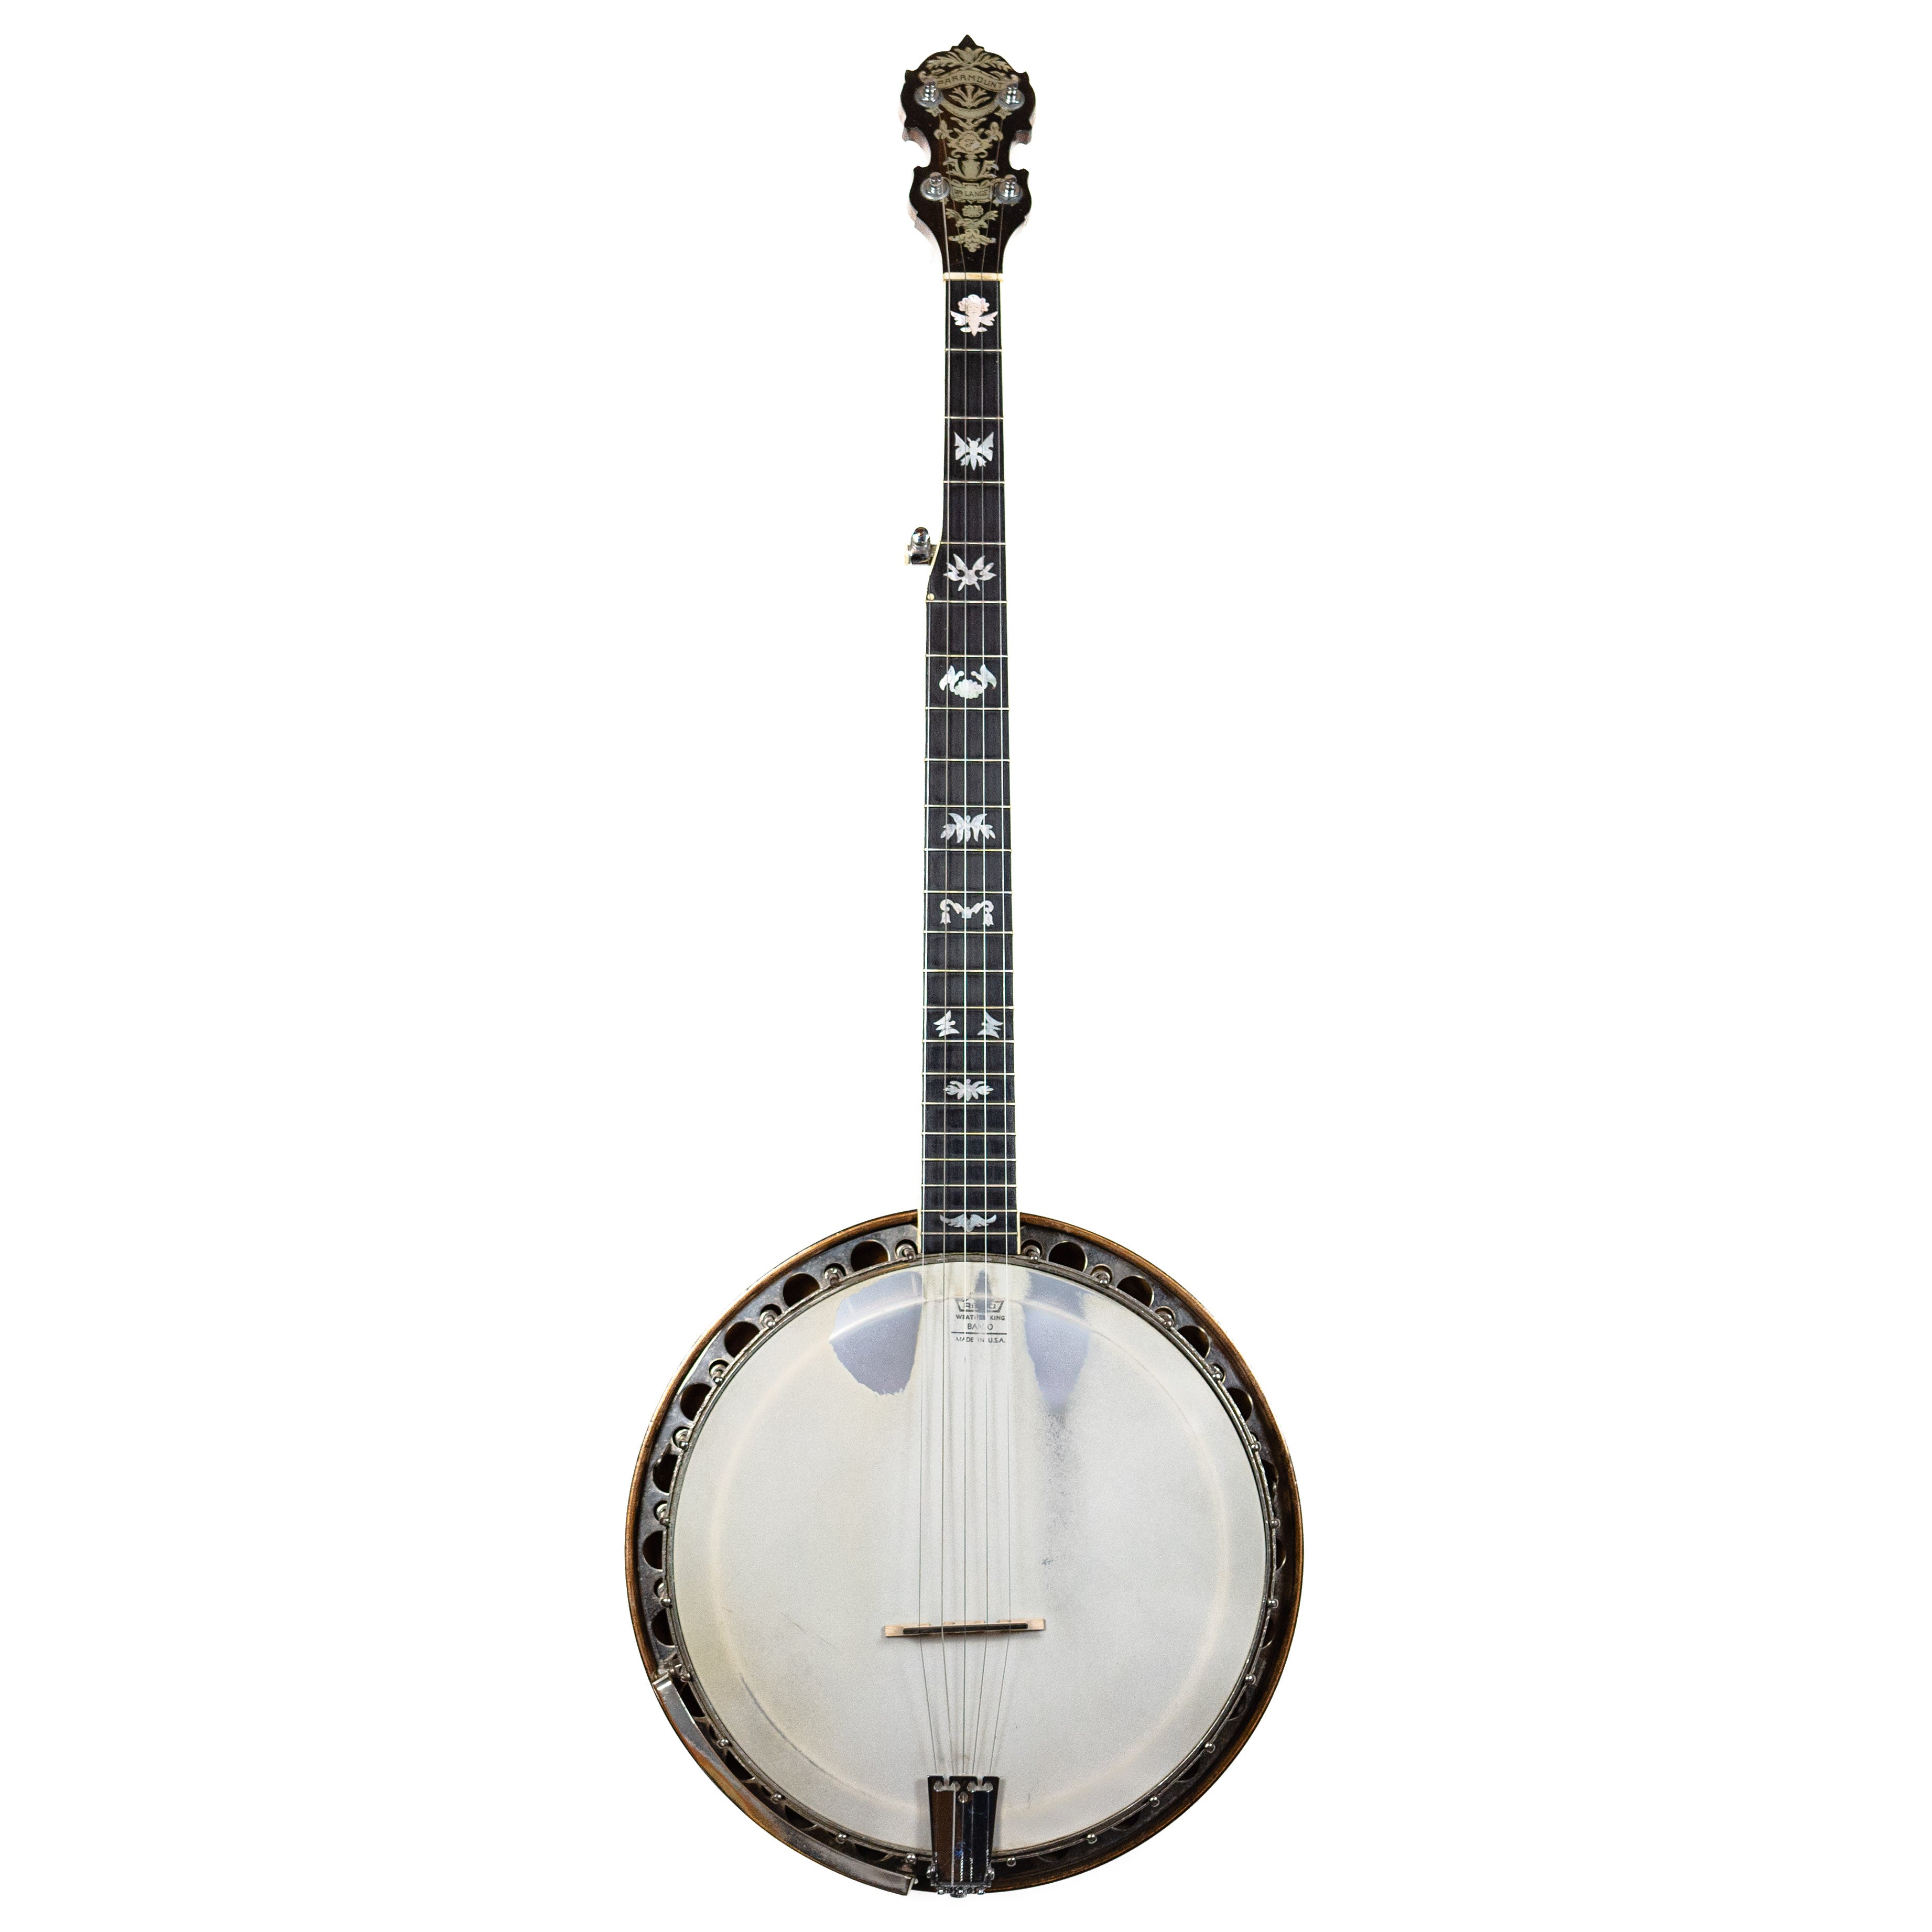 Paramount 1920s Banjo Converted to 5-string